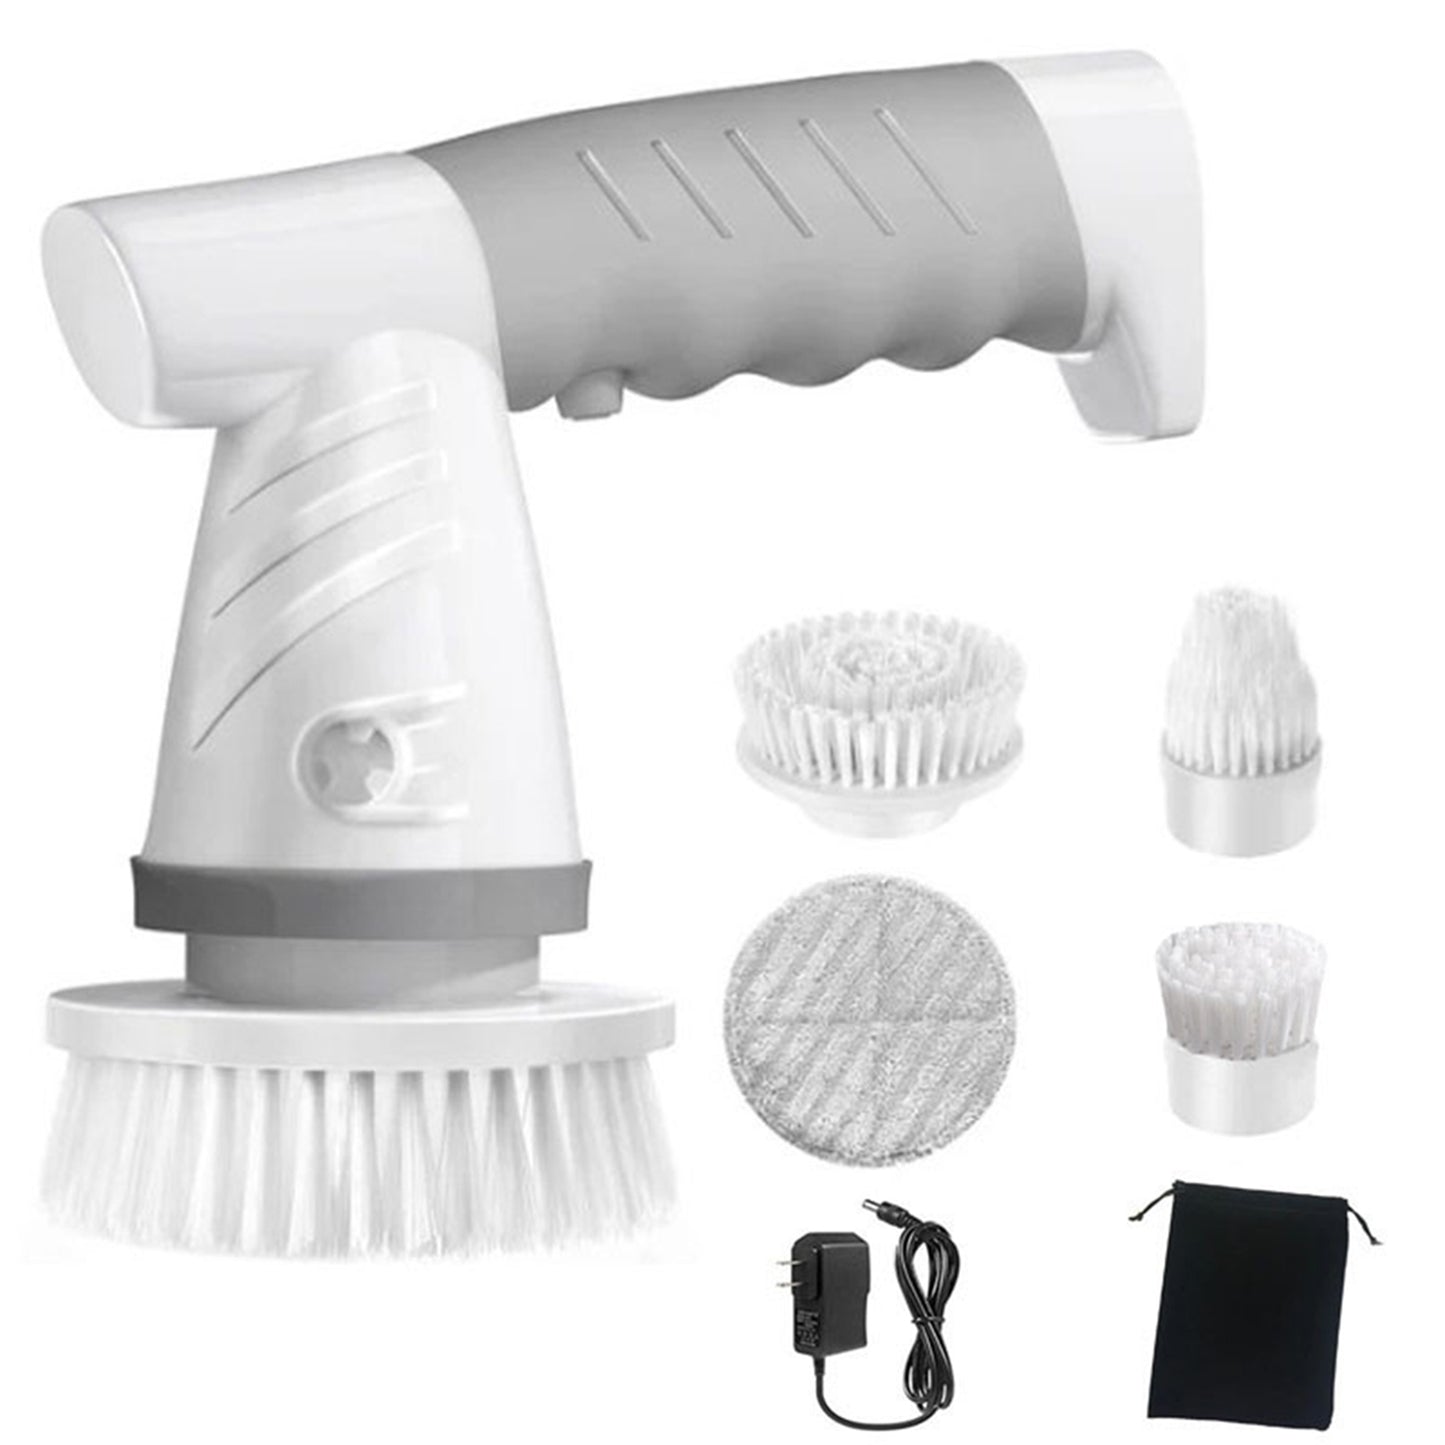 Cordless Electric Spin Scrubber - Effortless Cleaning with 4 Replaceable Brush Heads!